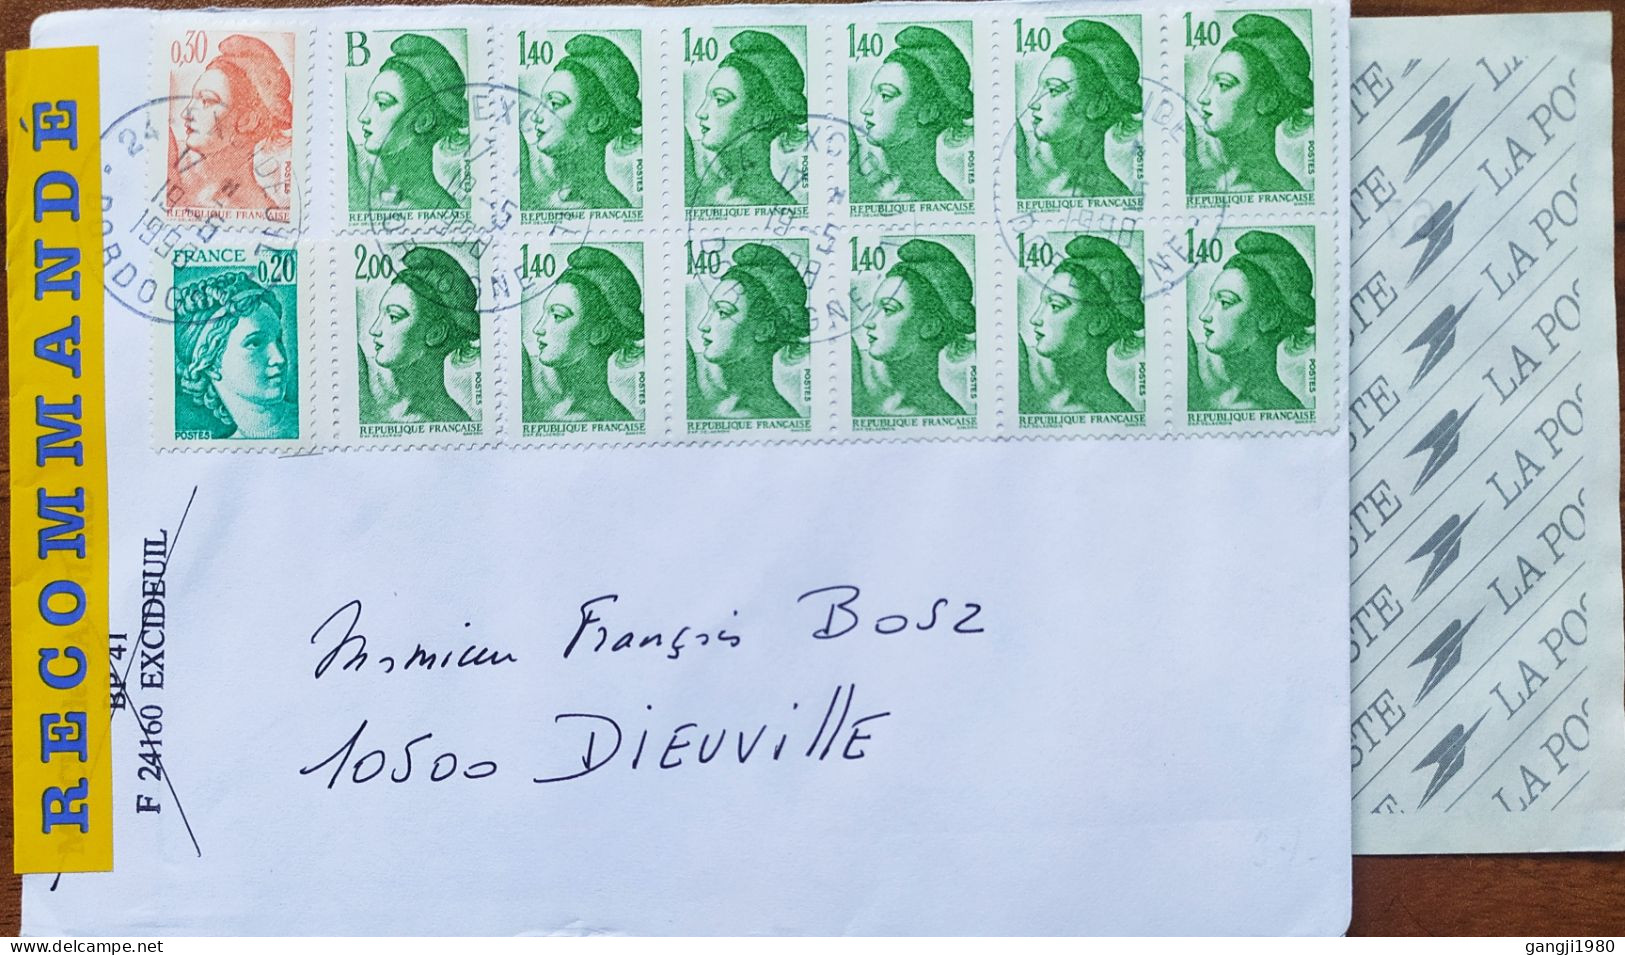 FRANCE 1998, REGISTER COVER USED, MULTI QUEEN 14 STAMP,  DEAUVILLE & EXCIDEULL CITY CANAL, - Briefe U. Dokumente